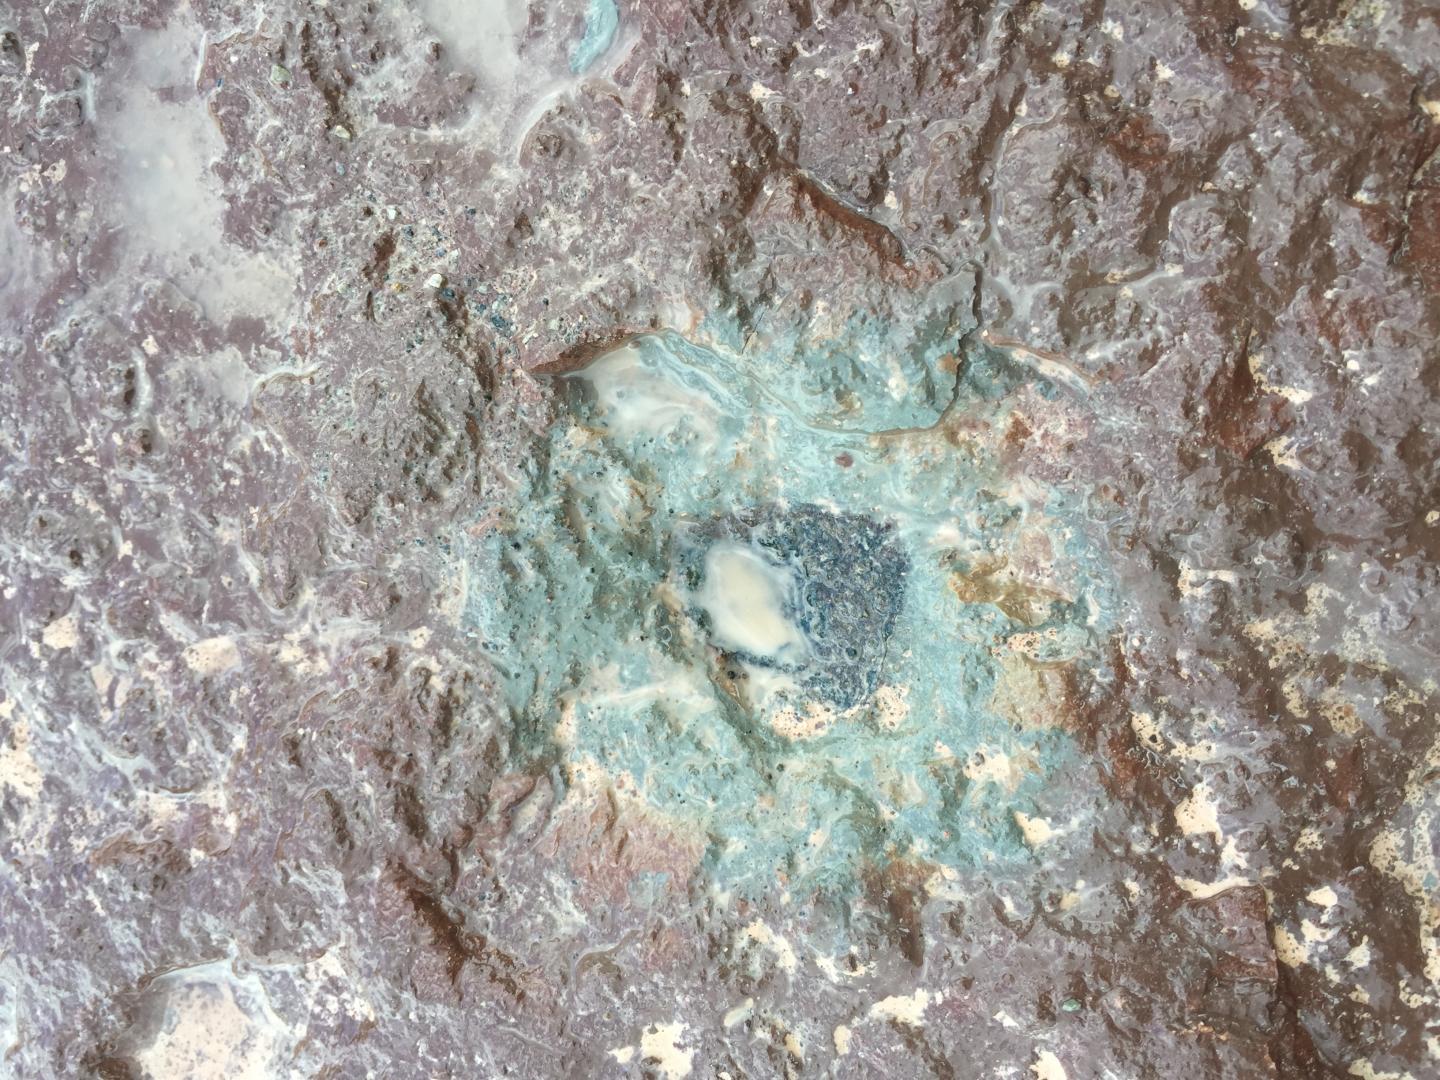 New Type of Meteorite Linked to Ancient Asteroid Collision